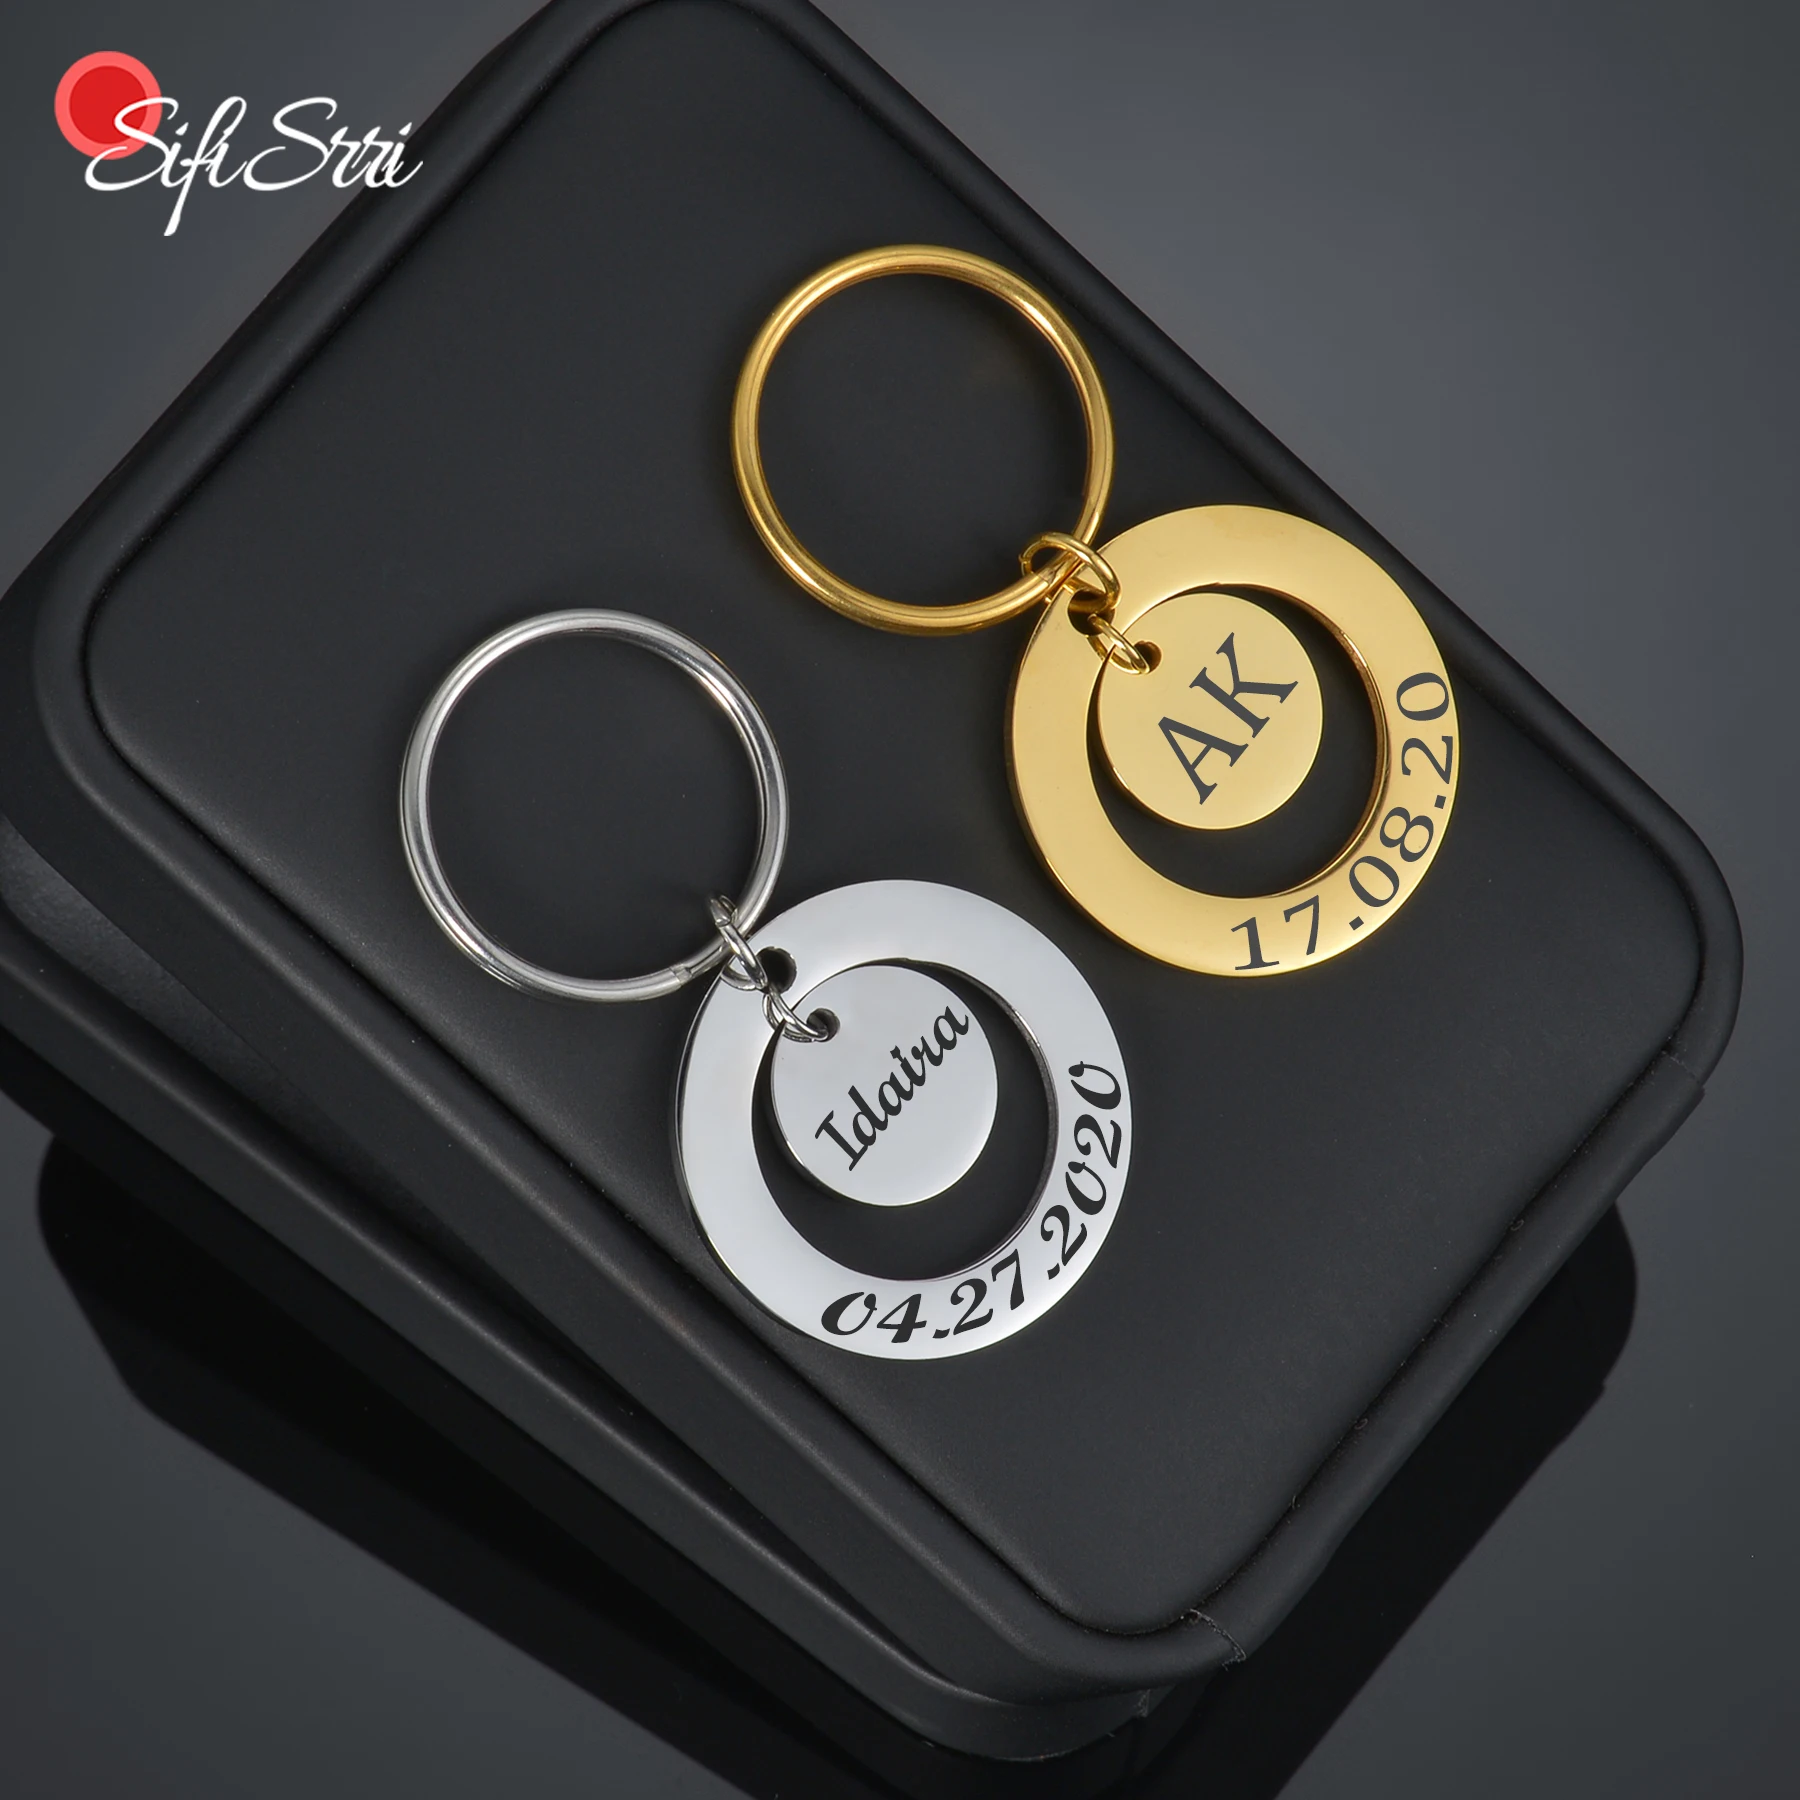 

Sifisrri Personalized Custom Keychains For Women Stainless Steel Engraved Name Date Round Keyrings Kids Family Jewerly Gifts